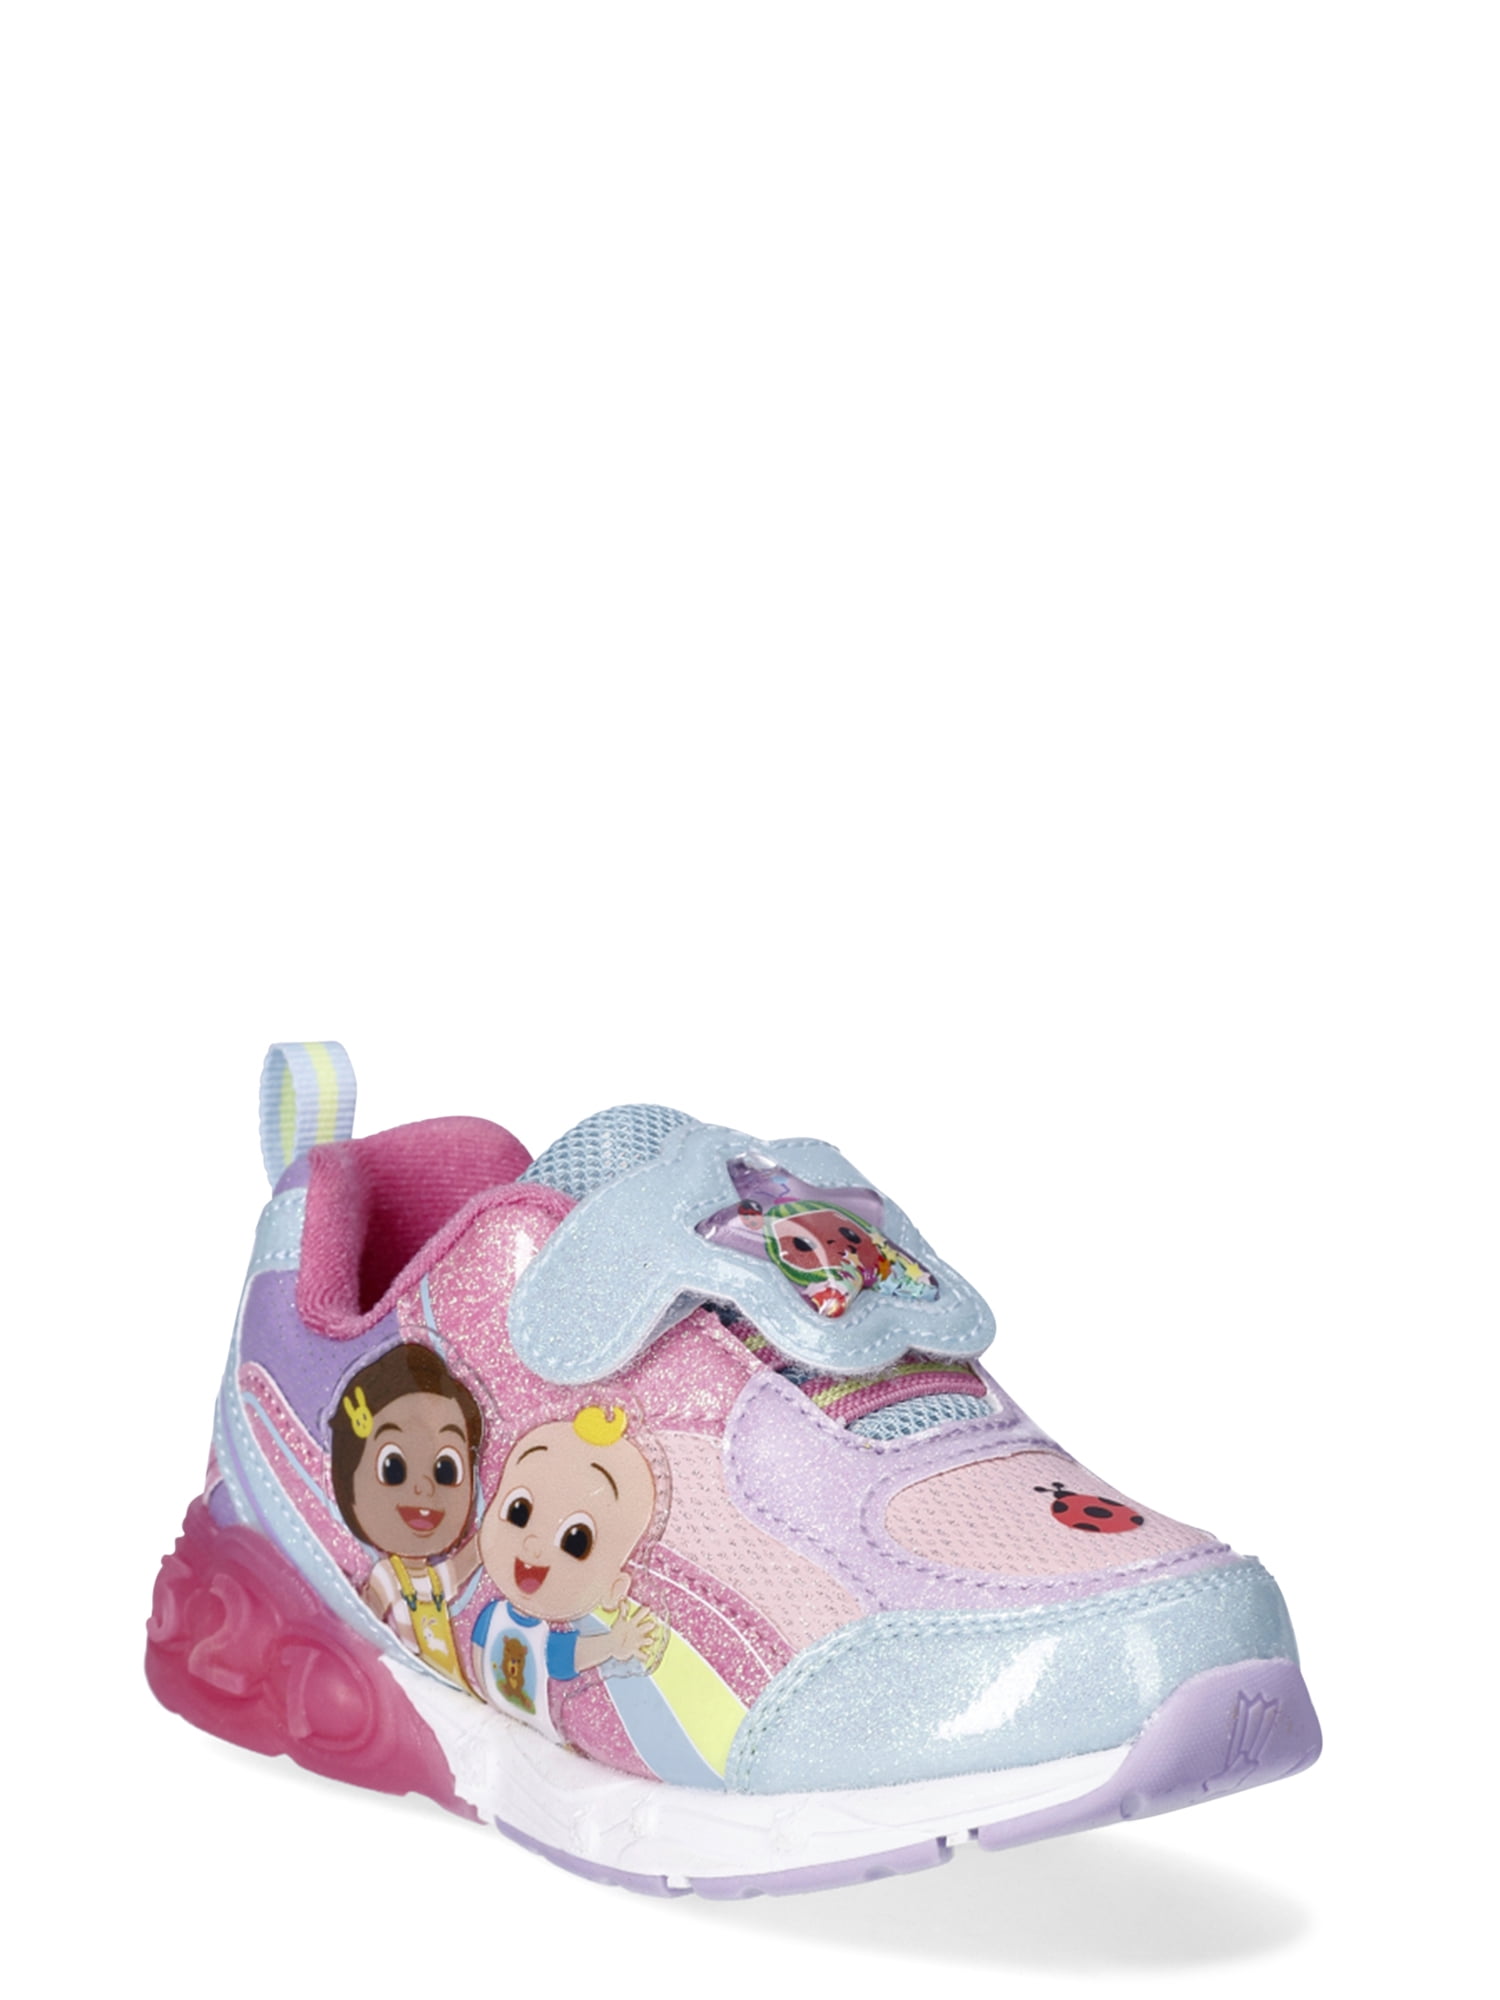 Carter's Just One You®️ Baby Girls' Sneakers - Pink : Target